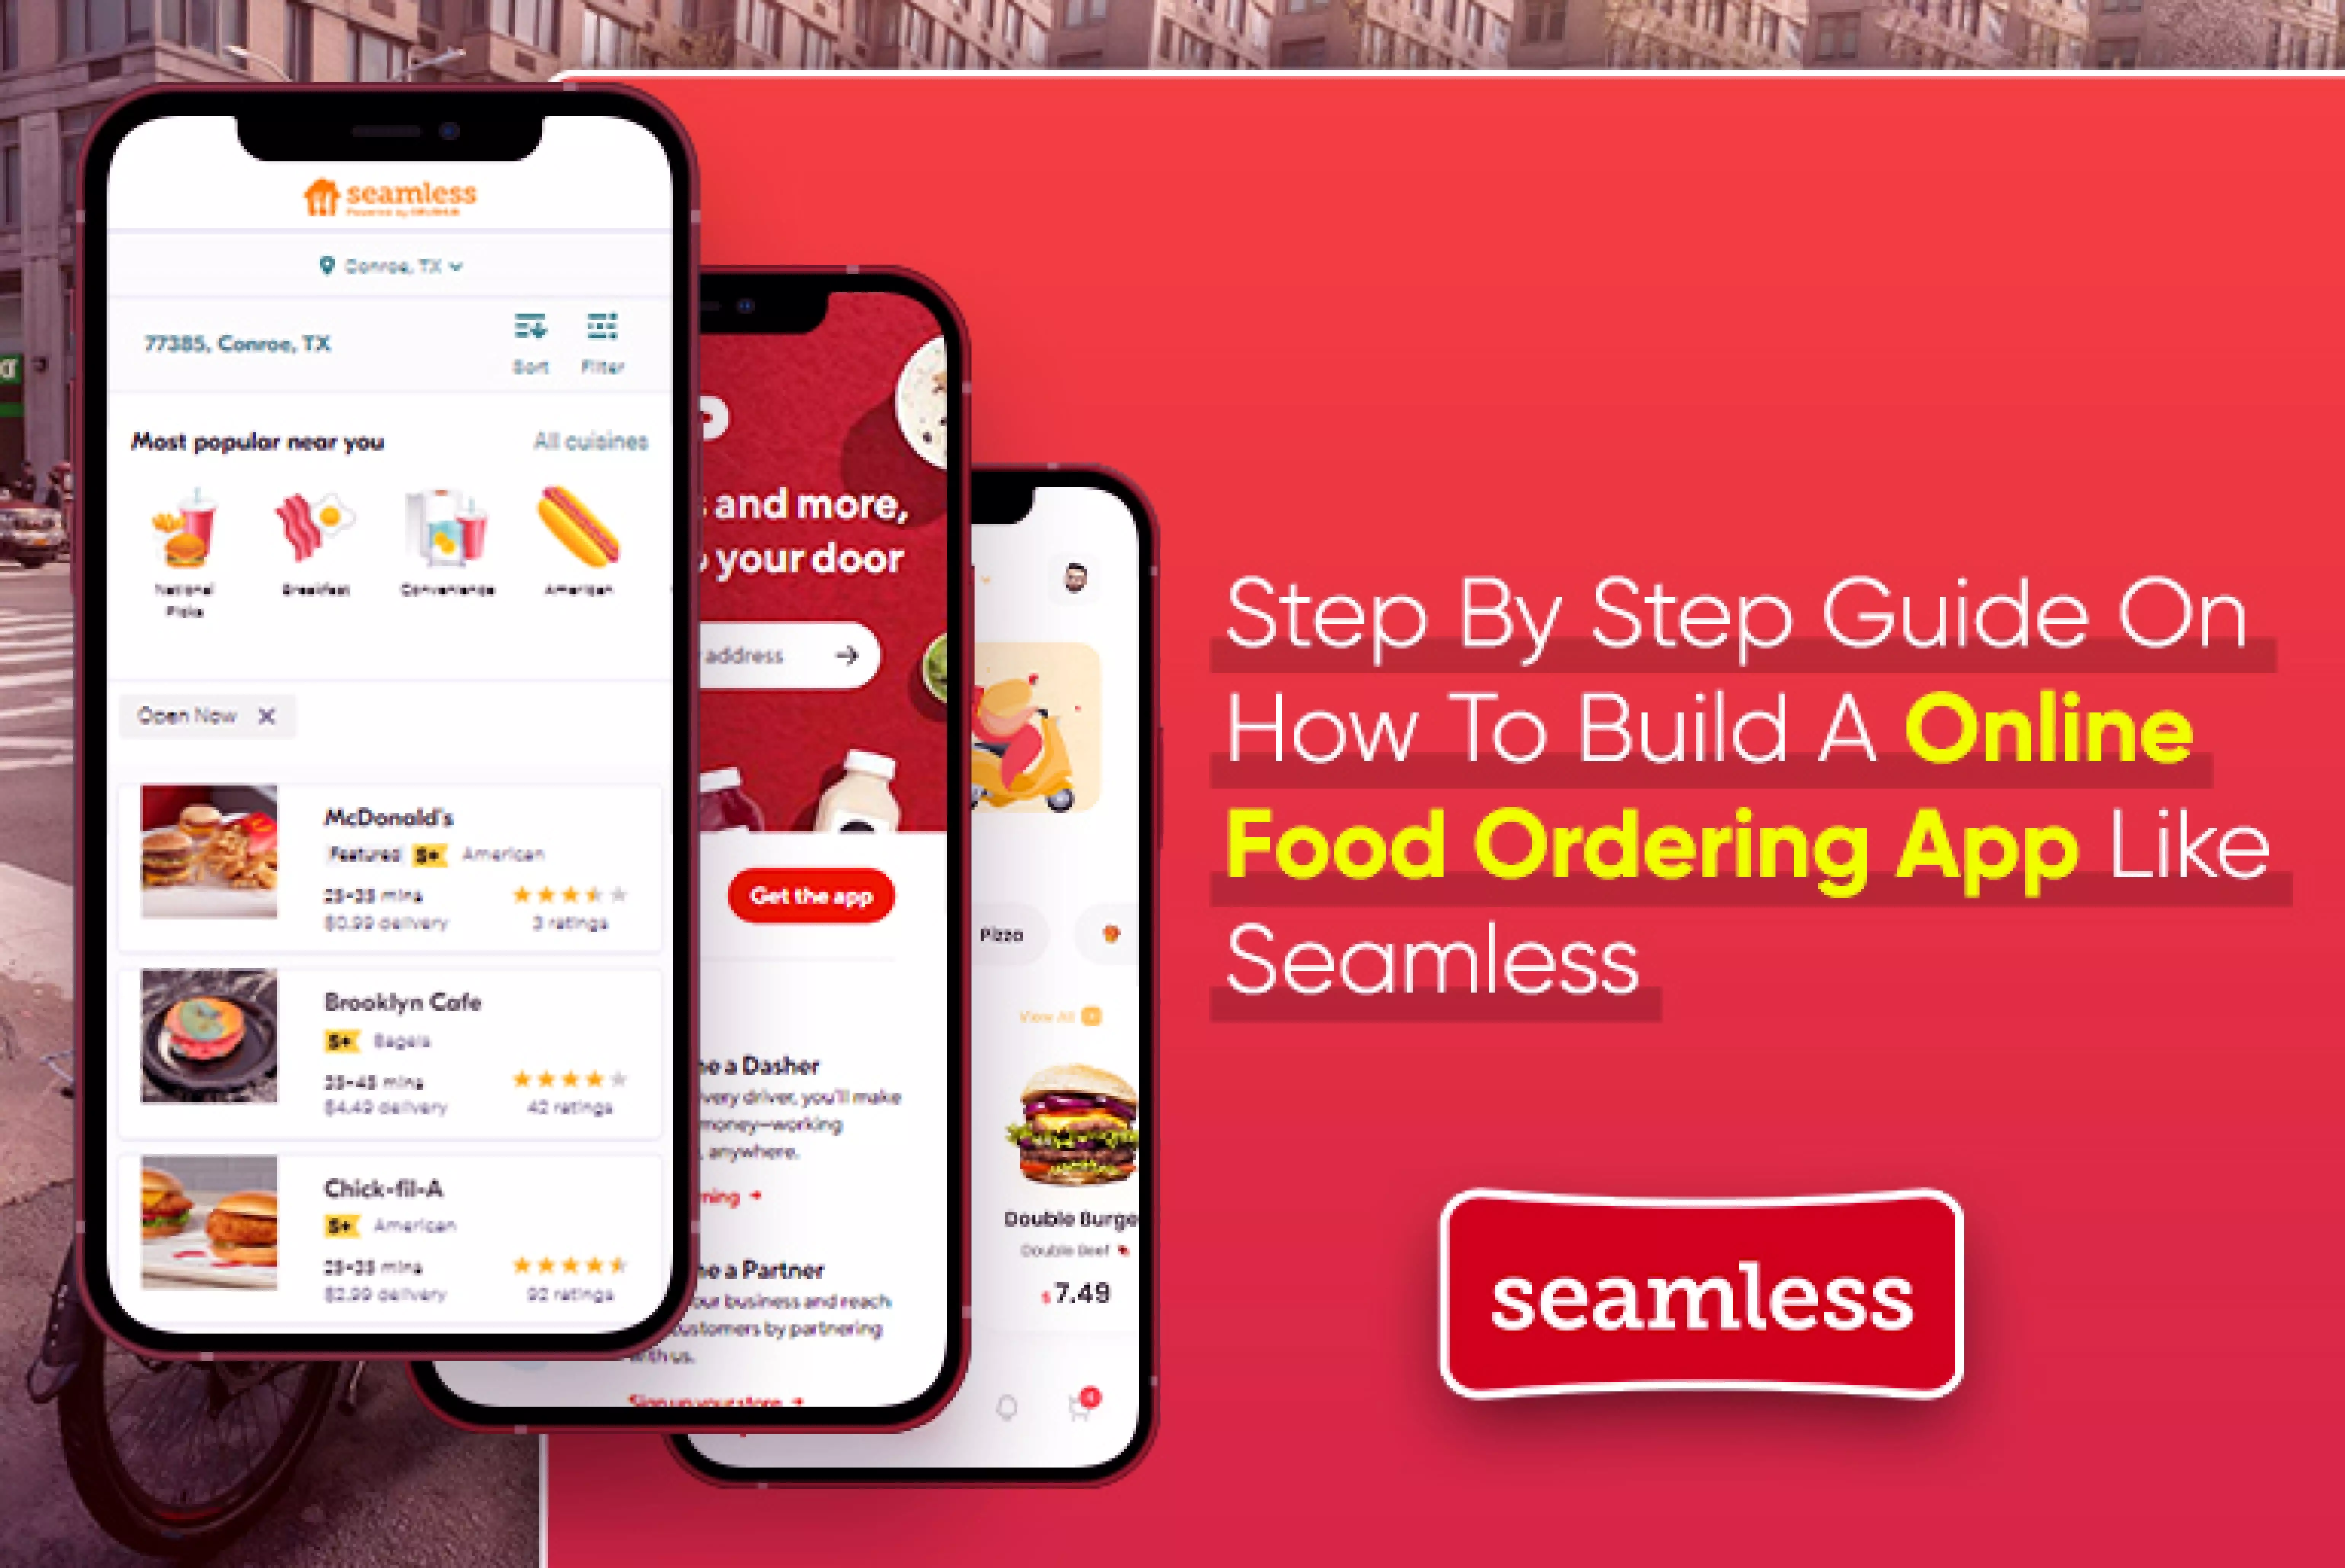 Step By Step Guide On How To Build A Food Ordering App Like Seamless_Thum